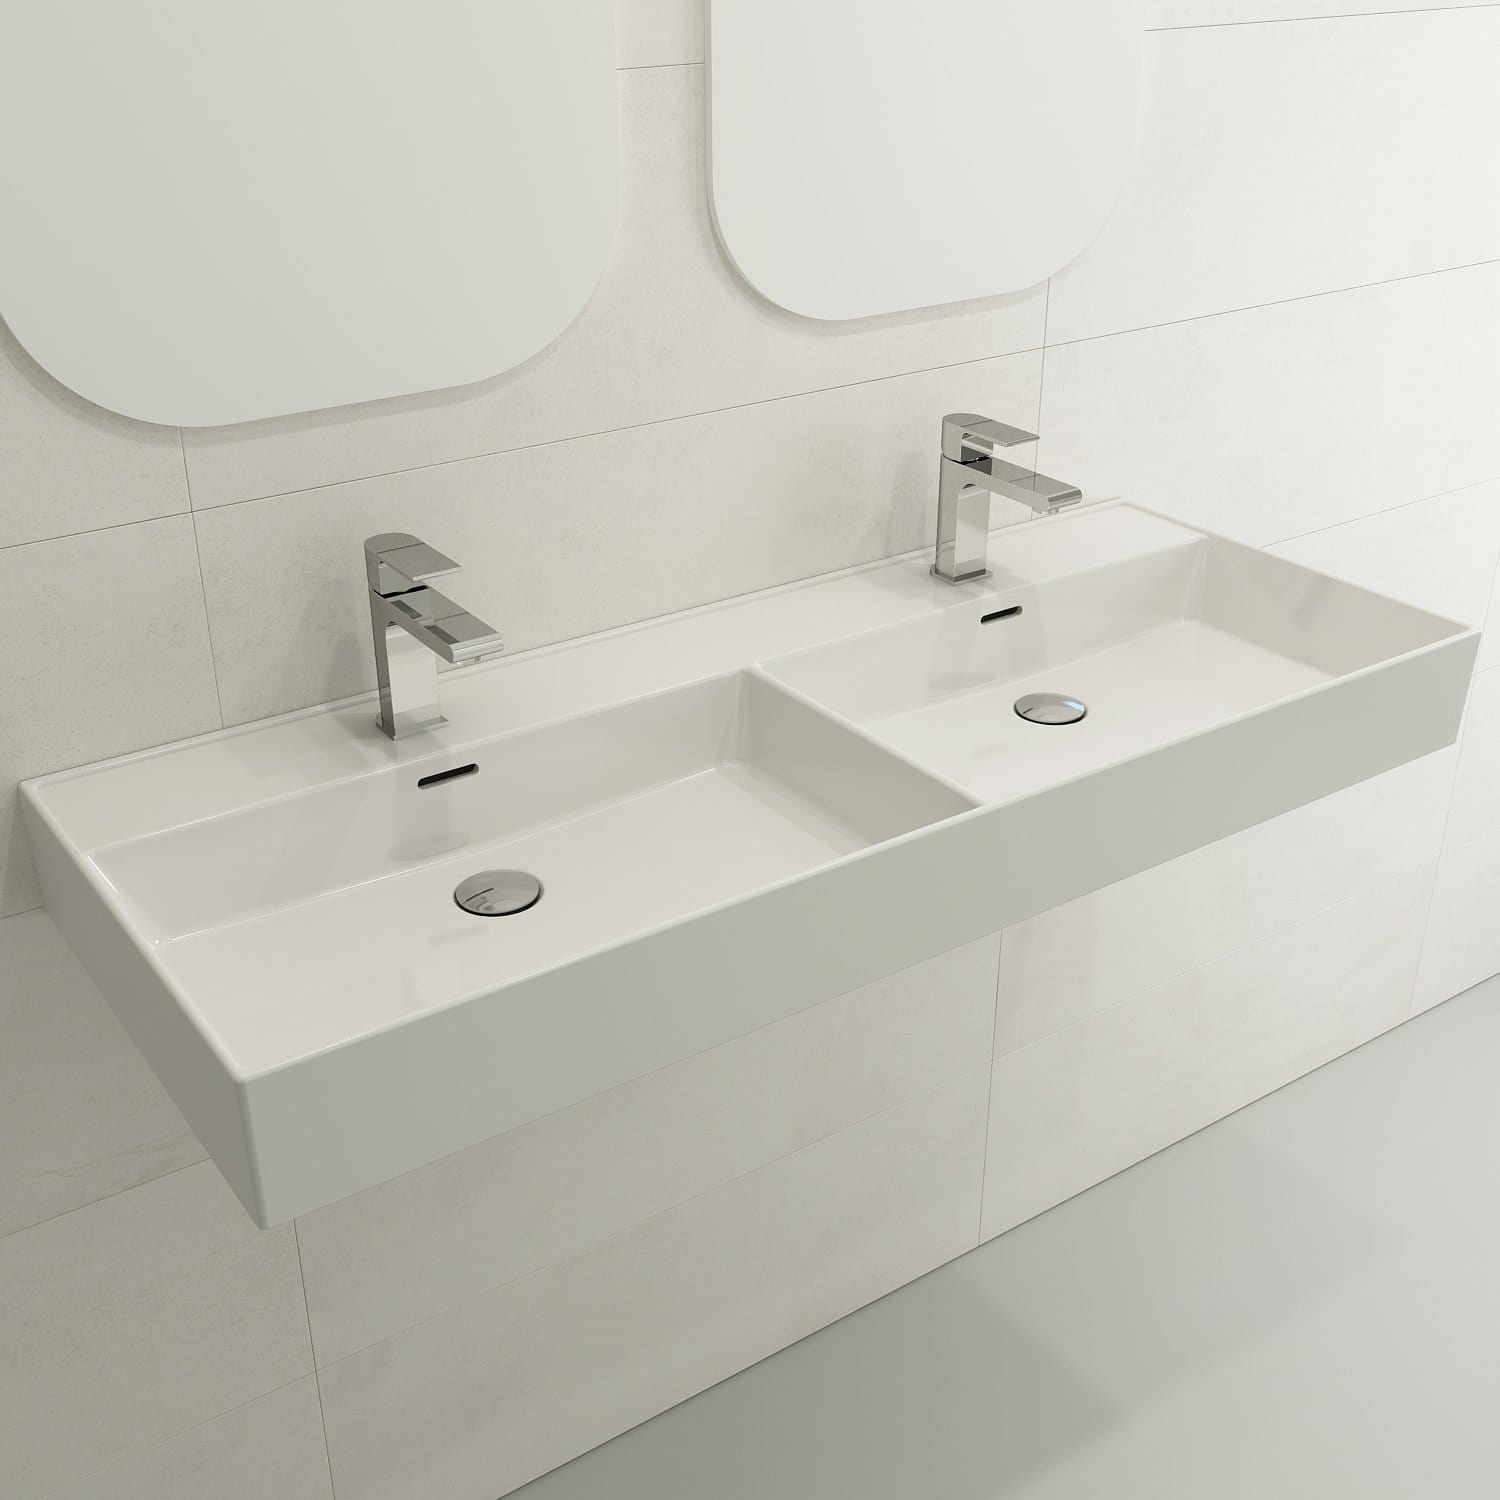 BOCCHI MILANO 47.75" Wall-Mounted Sink Fireclay Double Bowl For Two 1-Hole Faucets With Overflows